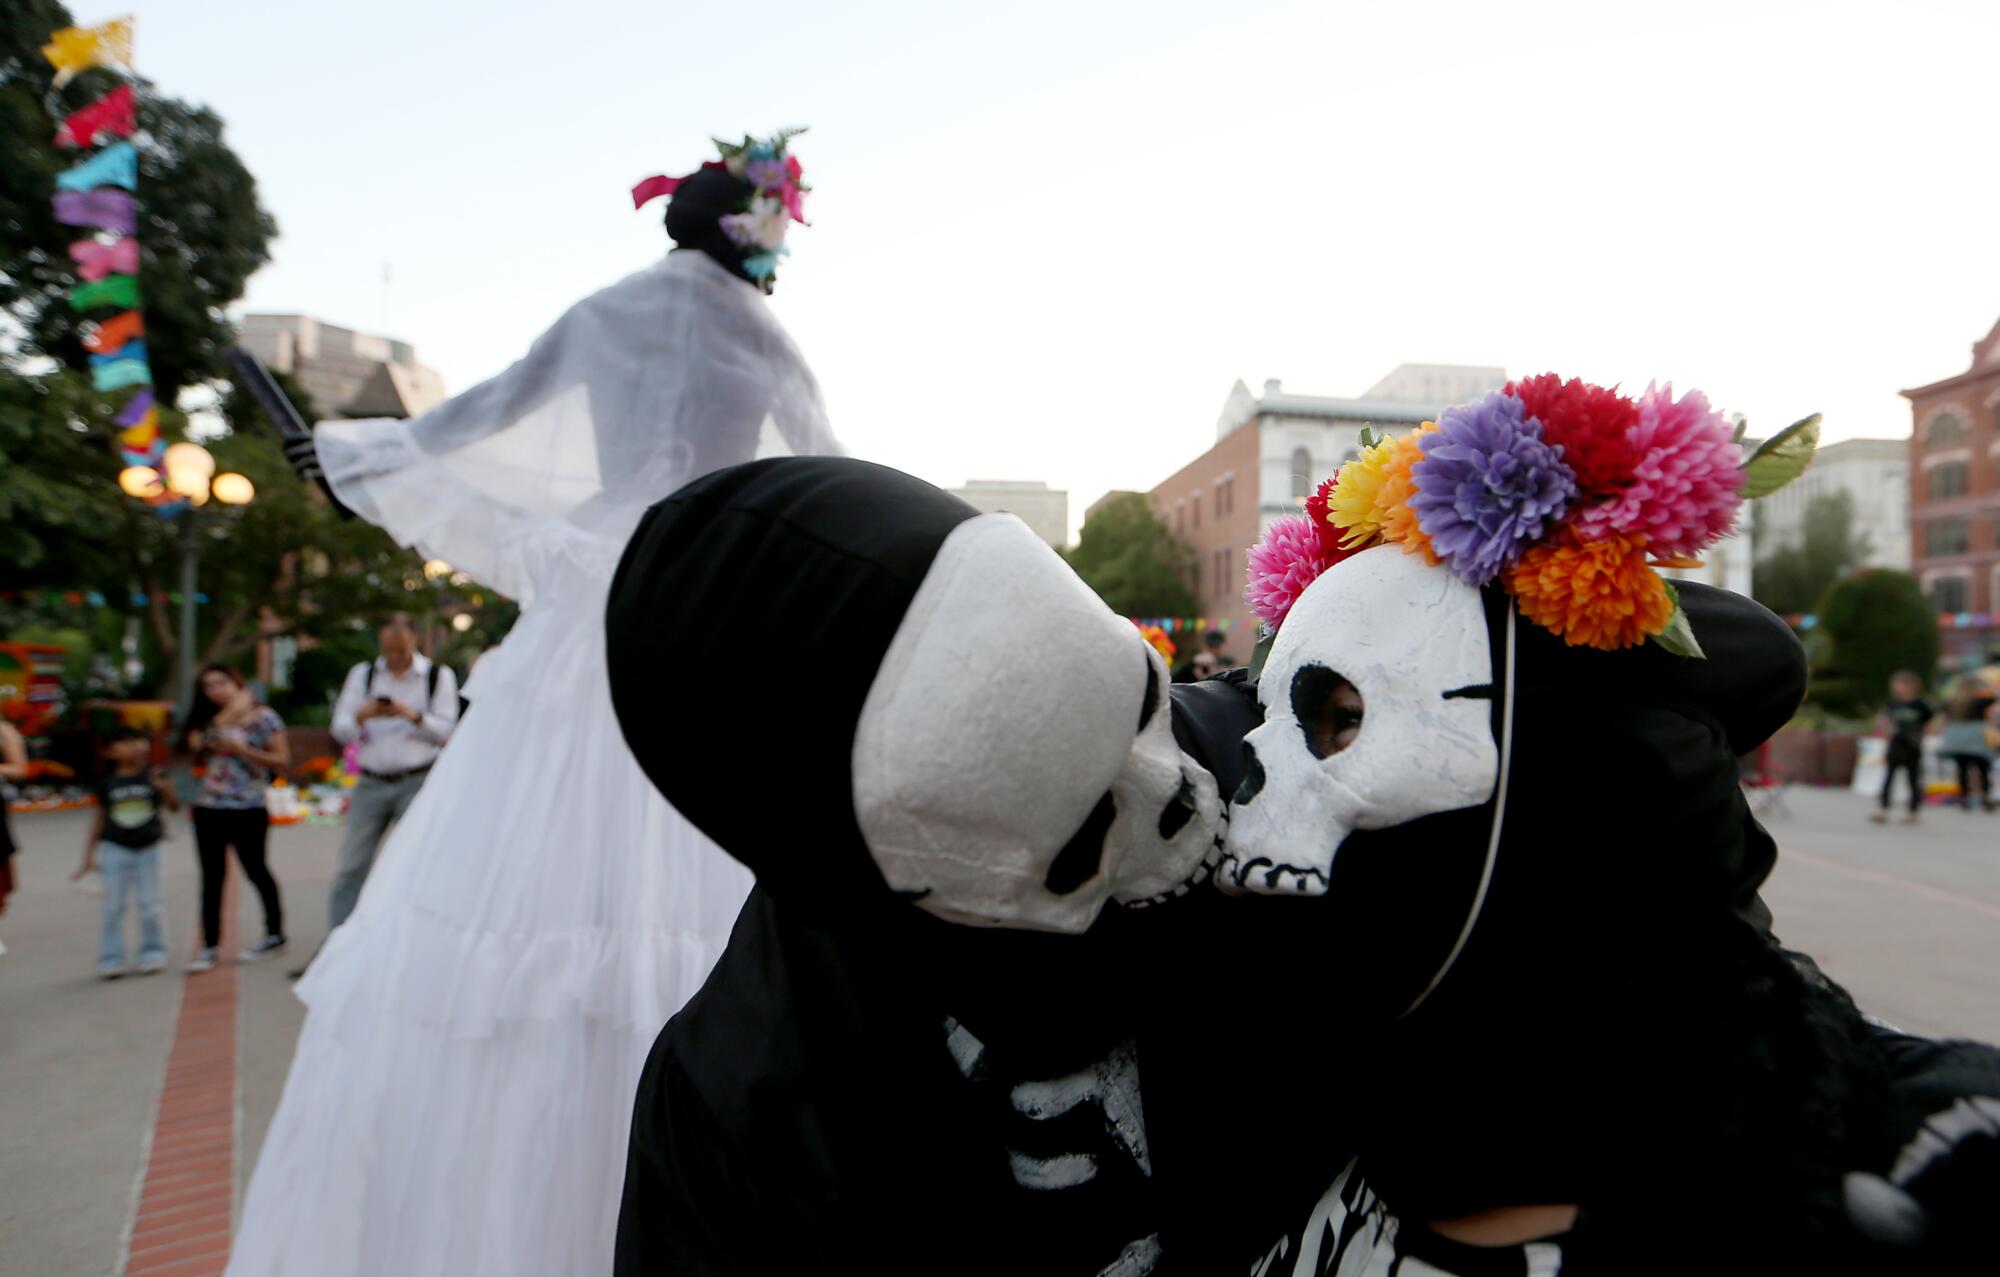 Skeletons share a kiss during Day of the Dead festivities at Olvera Plaza.